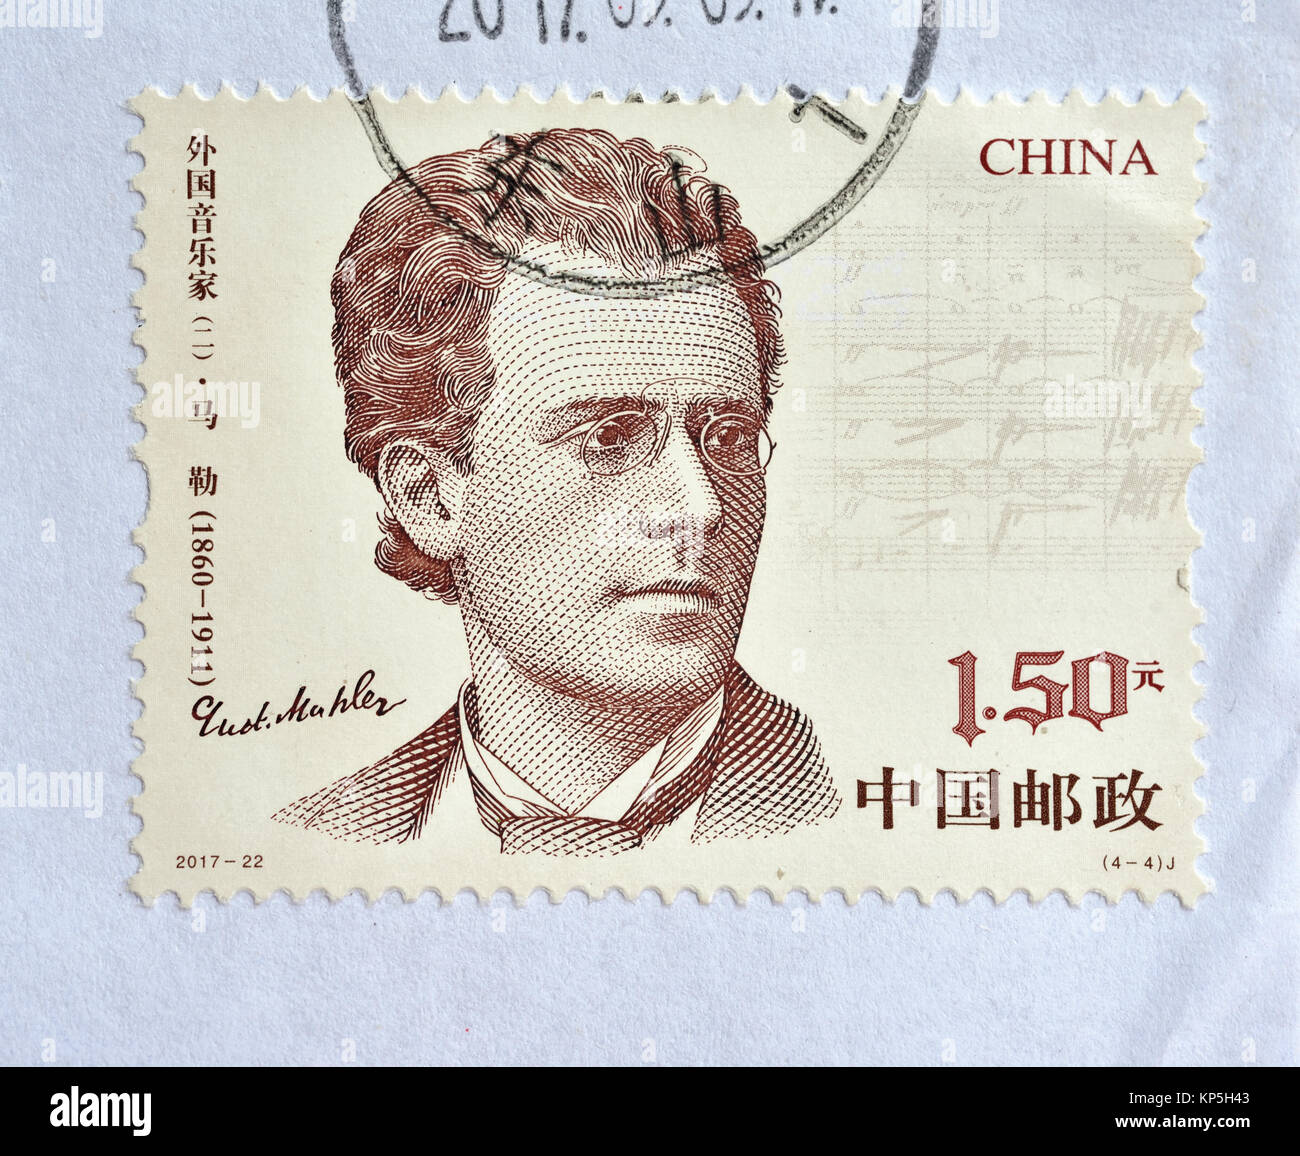 CHINA - CIRCA 2017: A stamp printed in China shows 2017-22 Foreign Musicians (2), (4-4), Gustav Mahler, 150 fen, 44 * 33 mm, circa 2017 Stock Photo